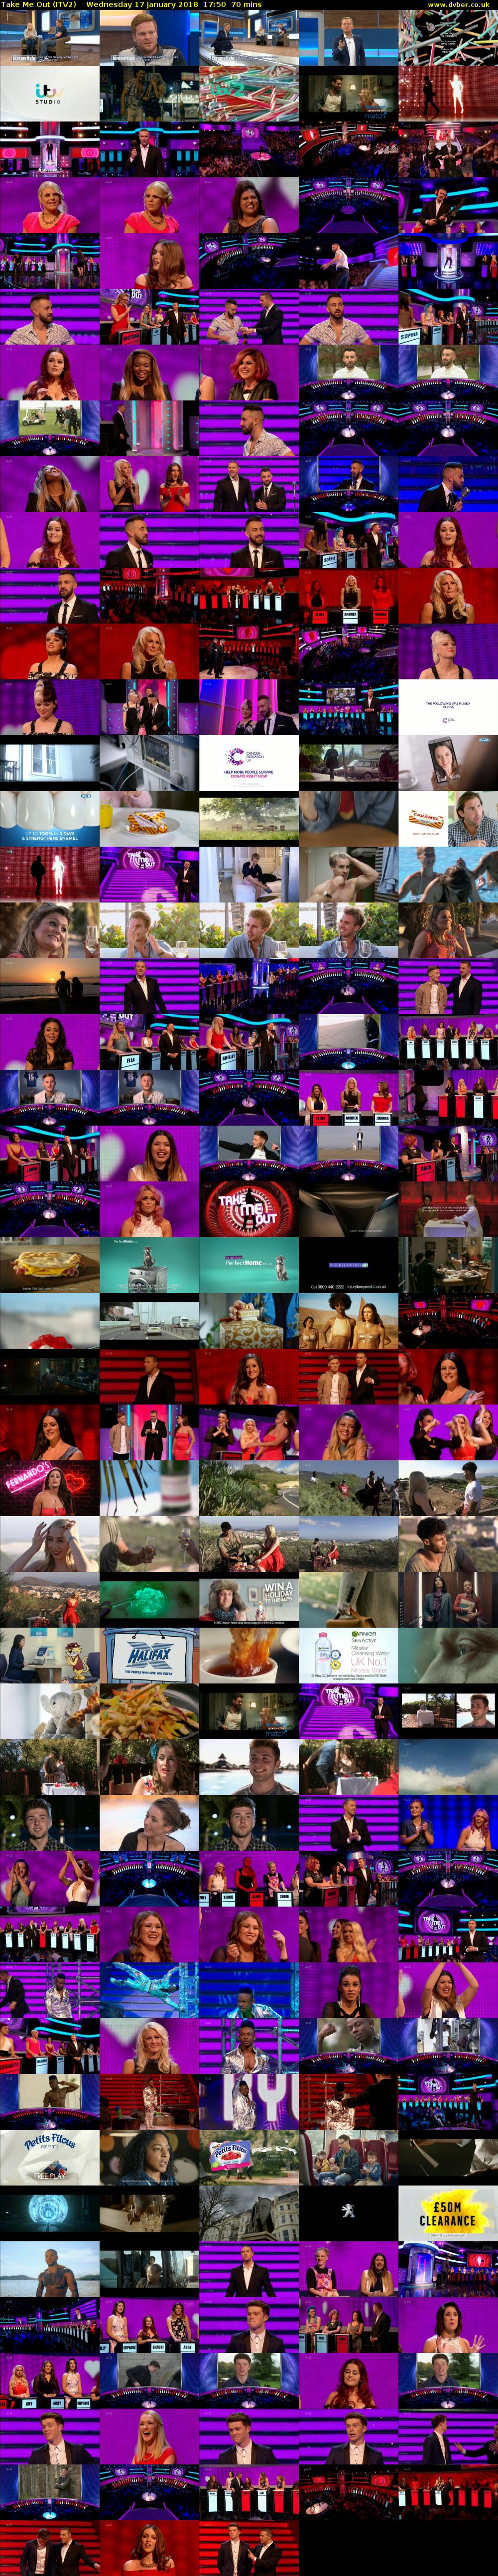 Take Me Out (ITV2) Wednesday 17 January 2018 17:50 - 19:00